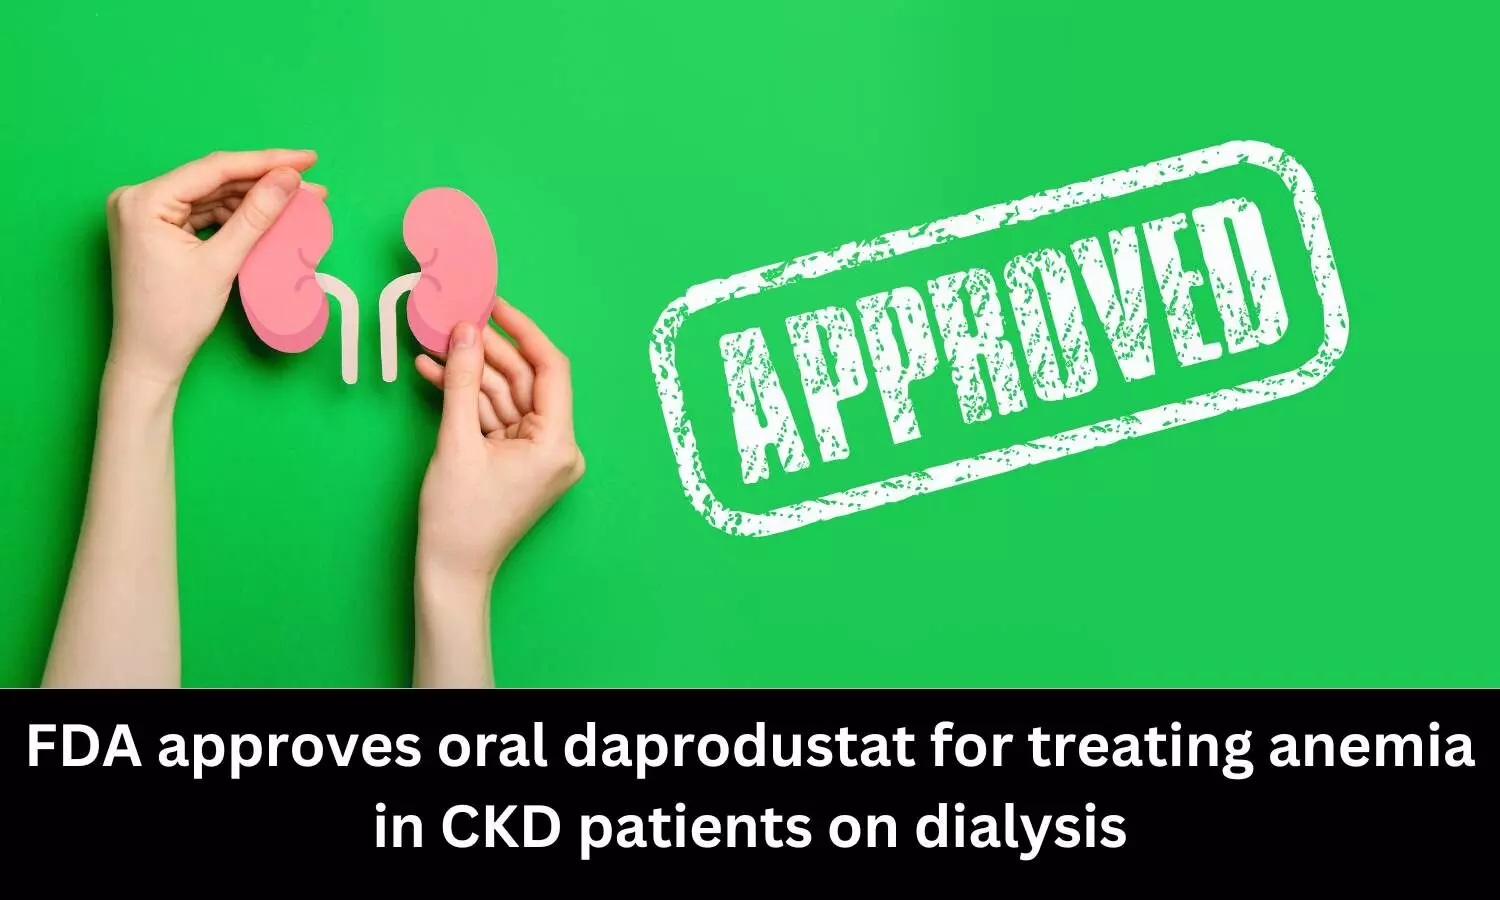 Oral Daprodustat gets USFDA nod for treating anaemia in CKD patients on dialysis